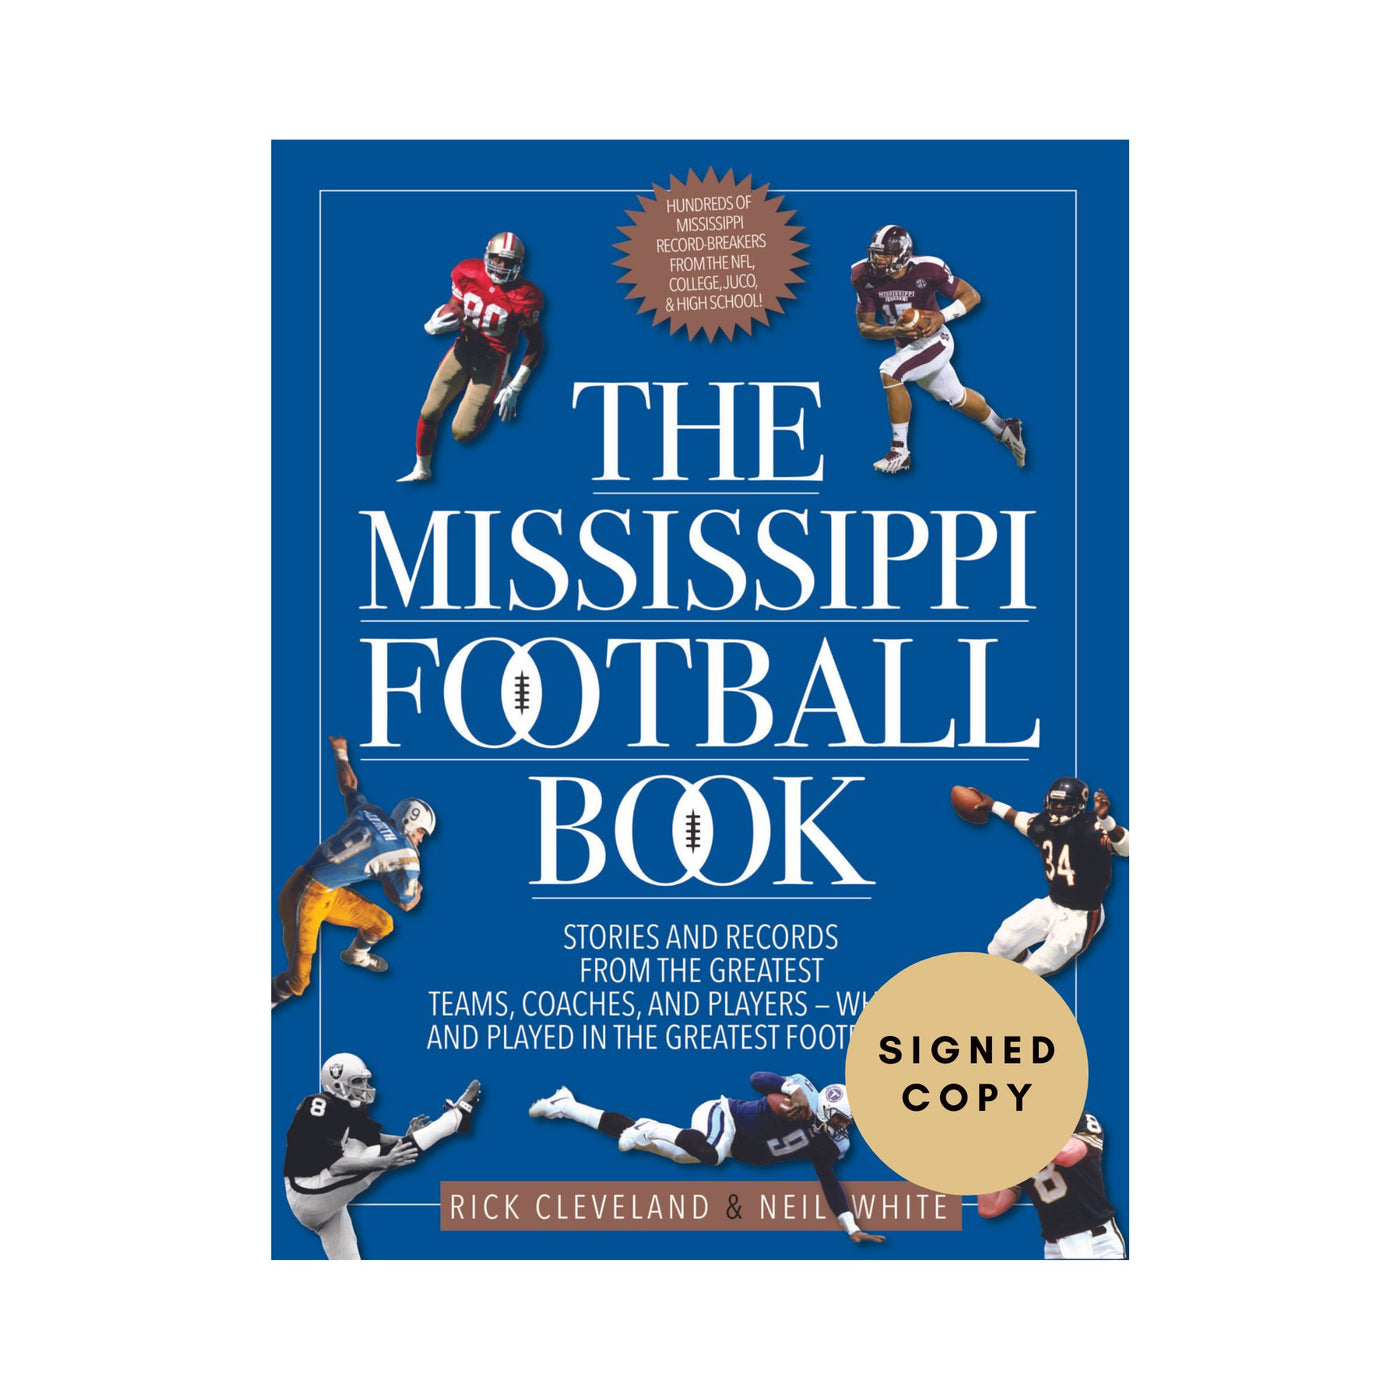 The Mississippi Football Book: Stories and Records From the Greatest Teams, Coaches, and Players - Who Lived and Played in the Greatest Football State by Rick Cleveland and Neil White